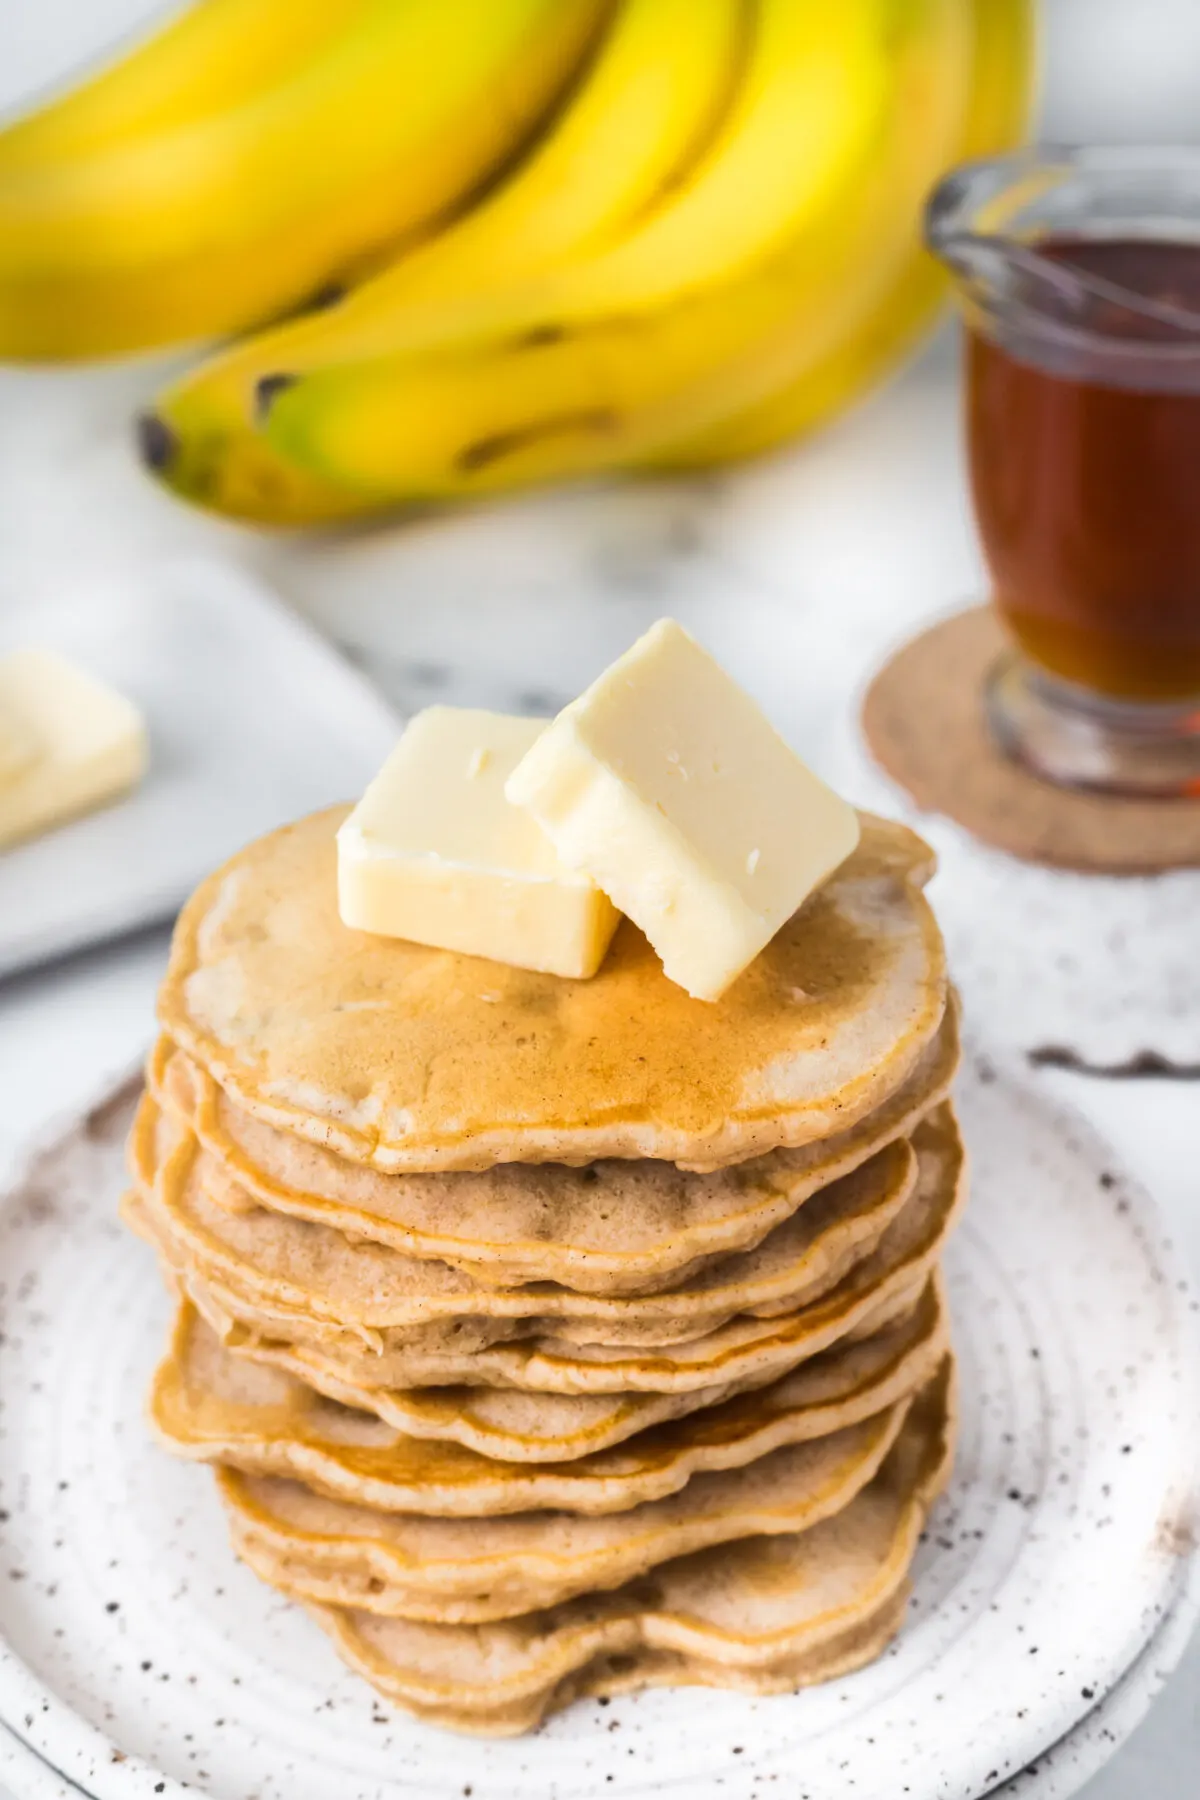 These delicious banana pancakes are perfect for a weekend breakfast or brunch. They're easy to make and only require a few simple ingredients.